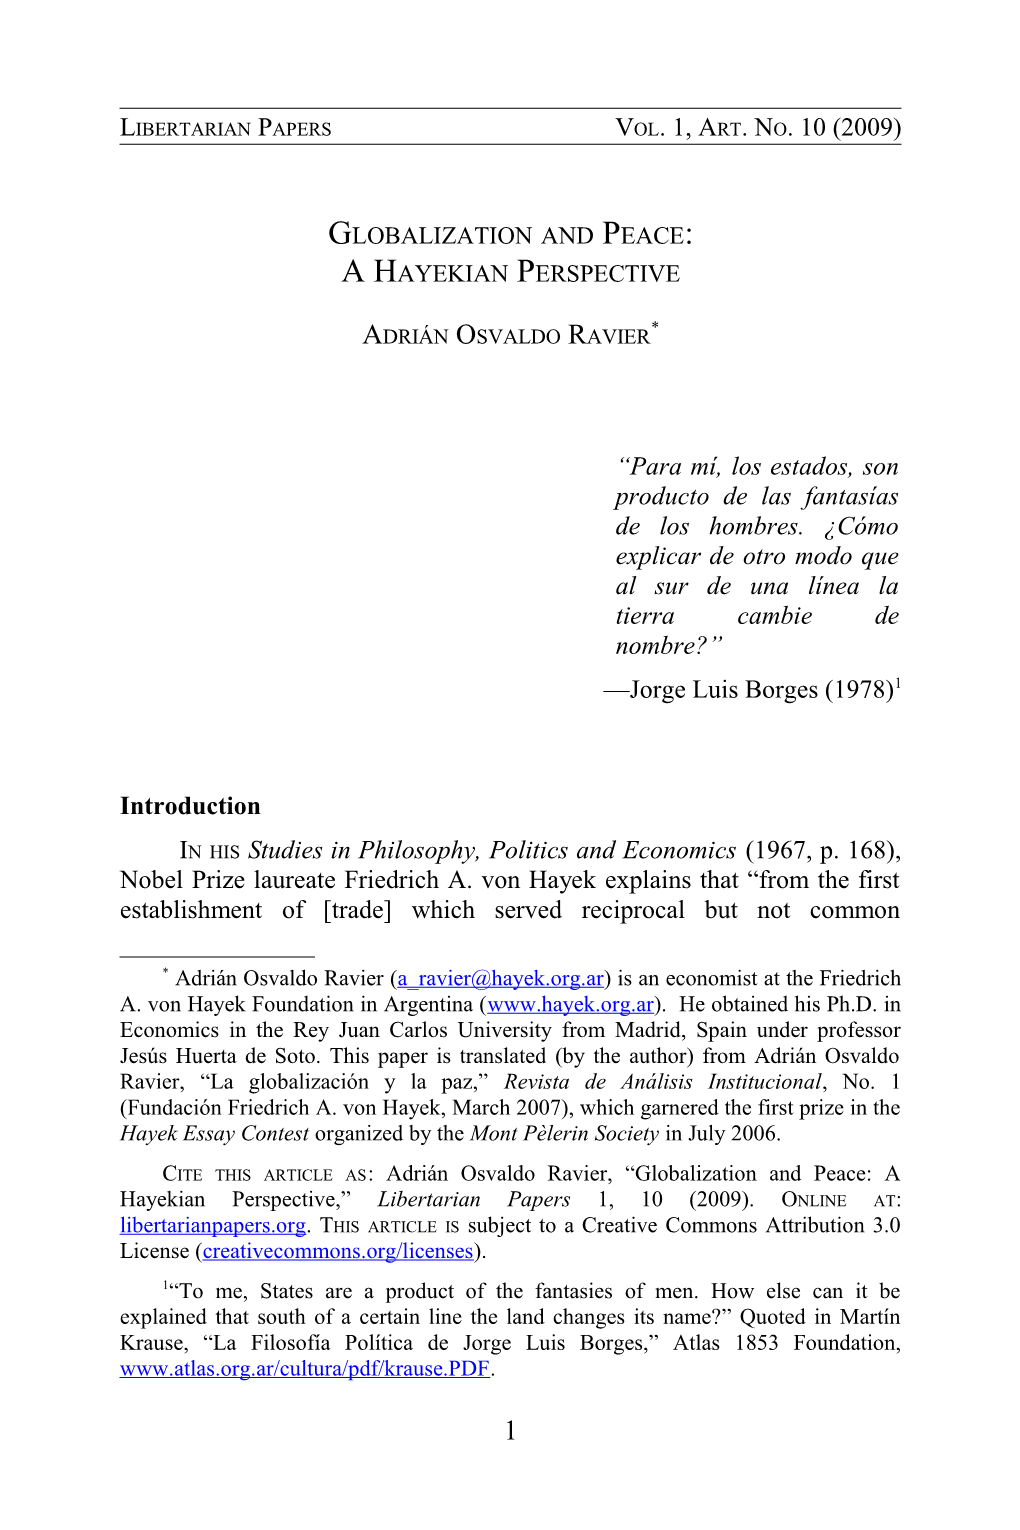 Globalization and Peace: a Hayekian Perspective